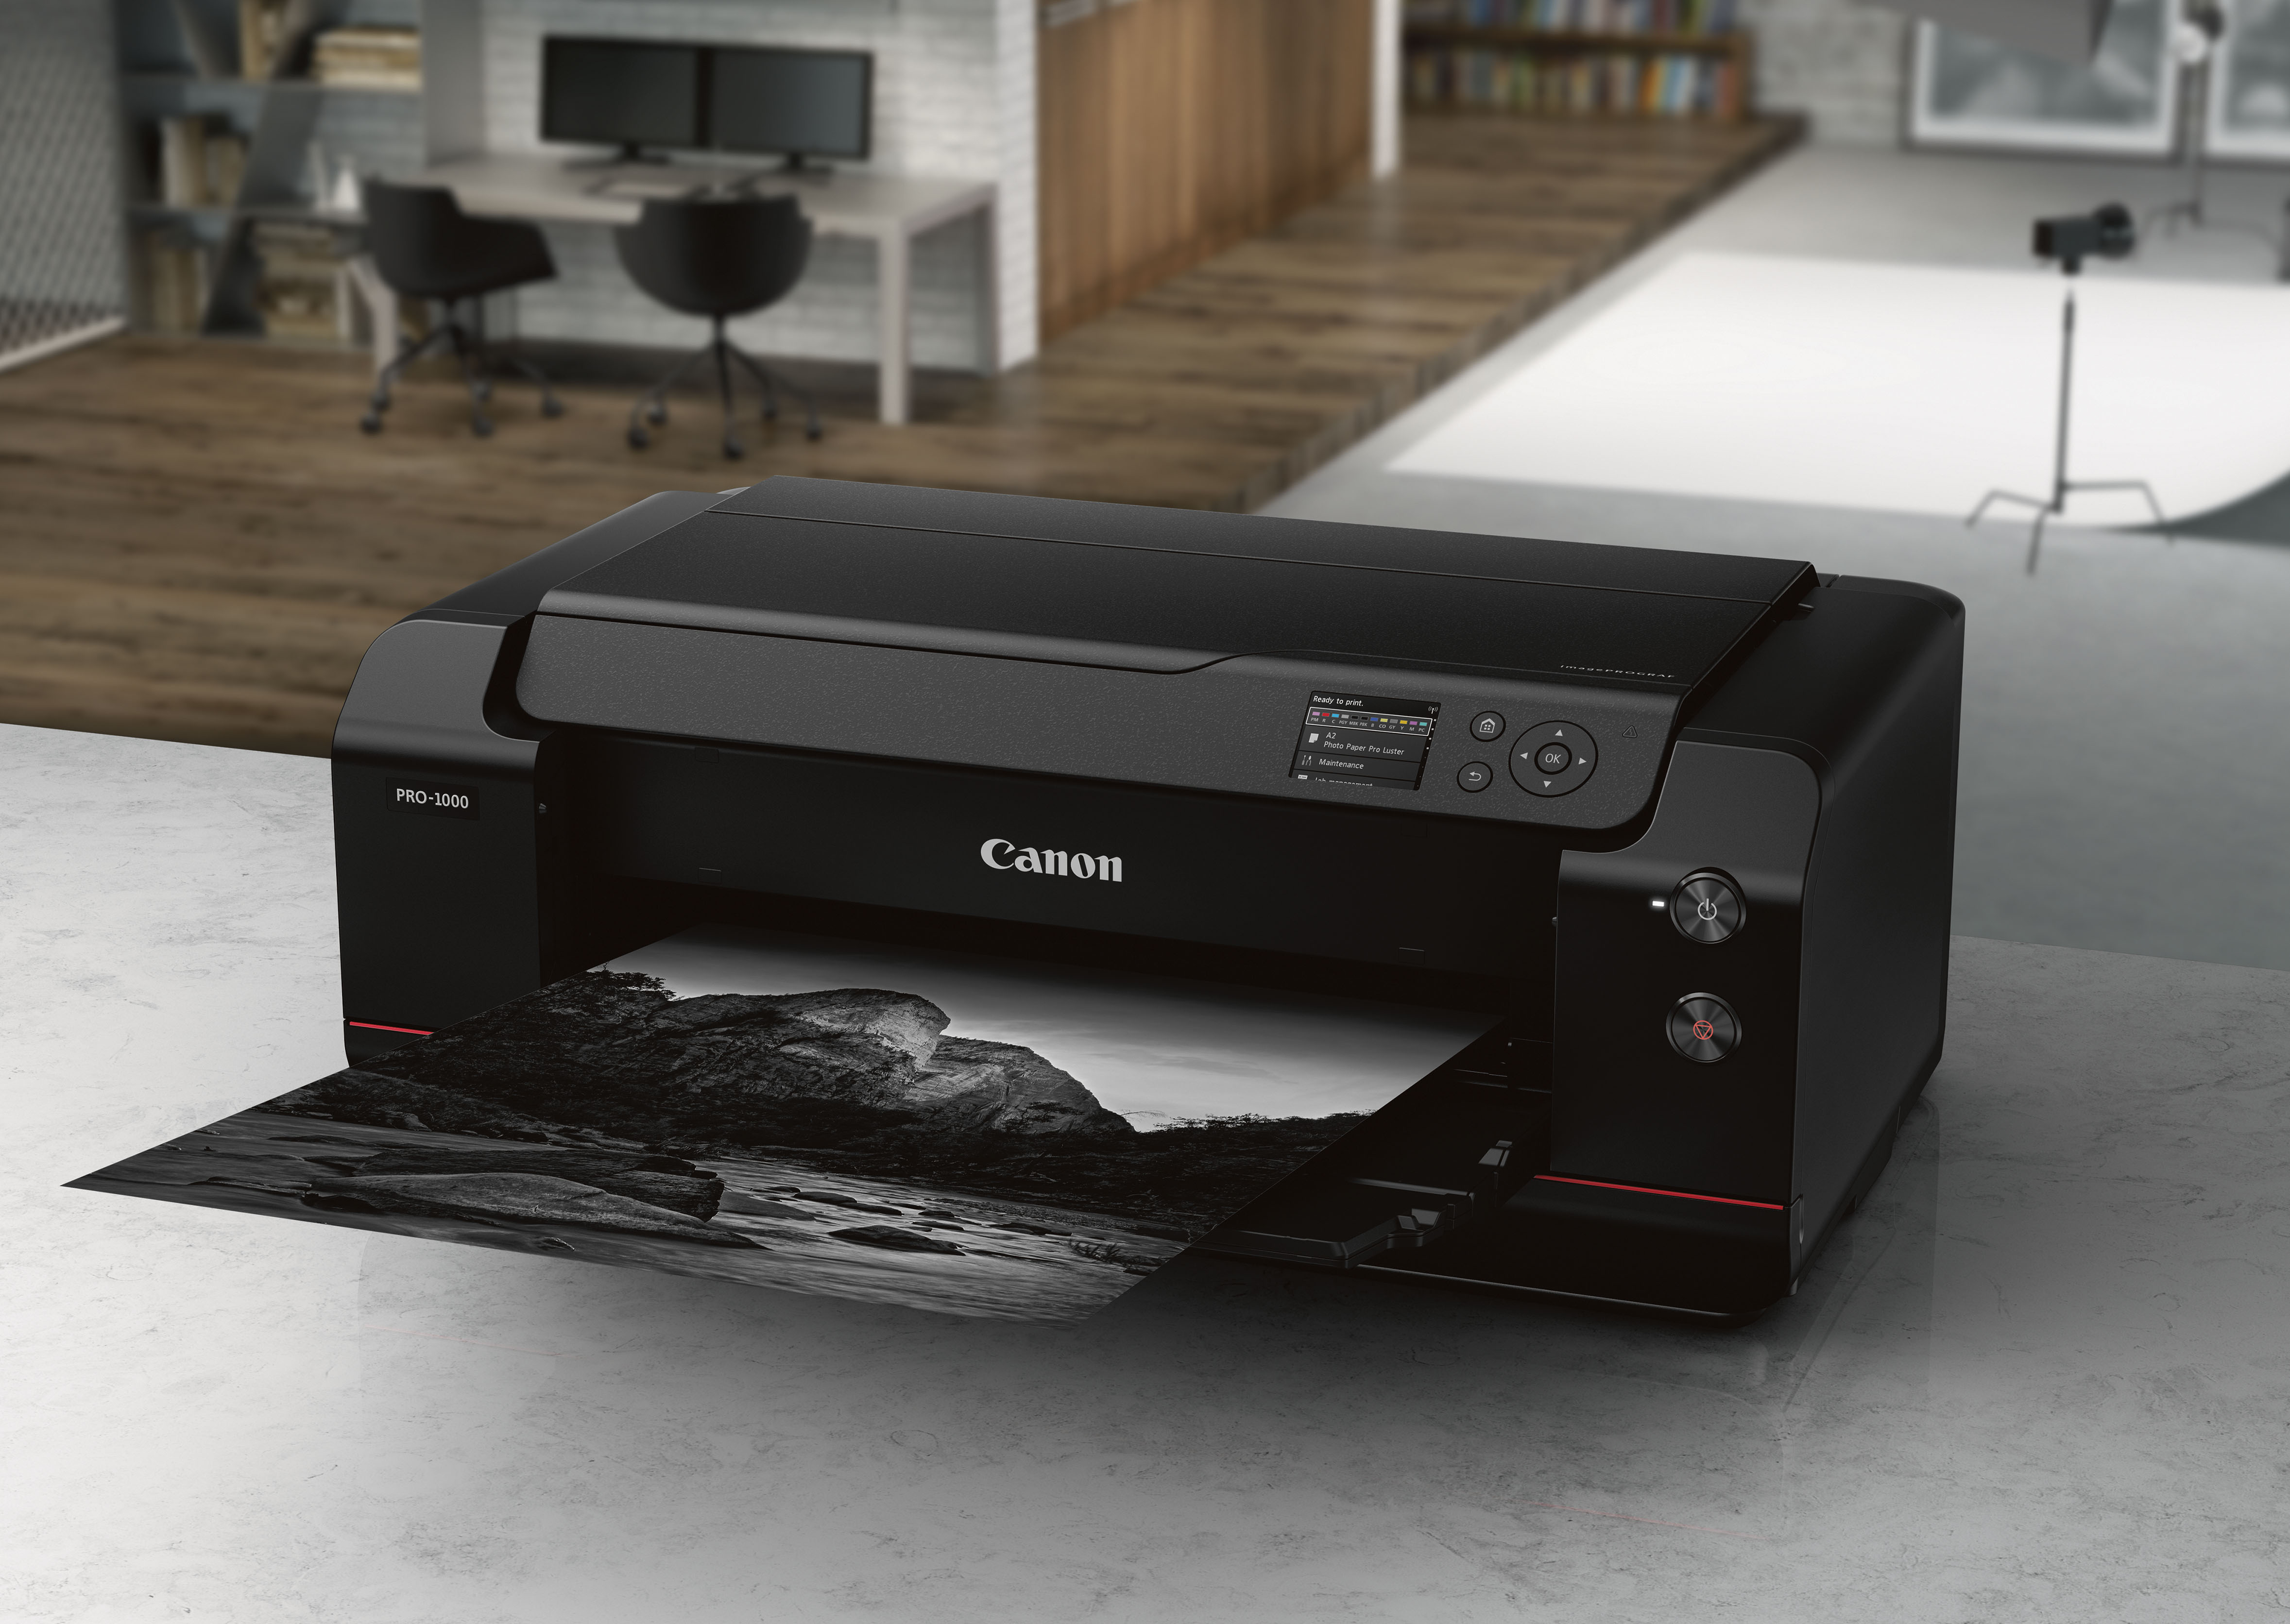 The Canon imagePROGRAF Pro-1000 is the Best Experience I've Ever Had with a Photo Printer